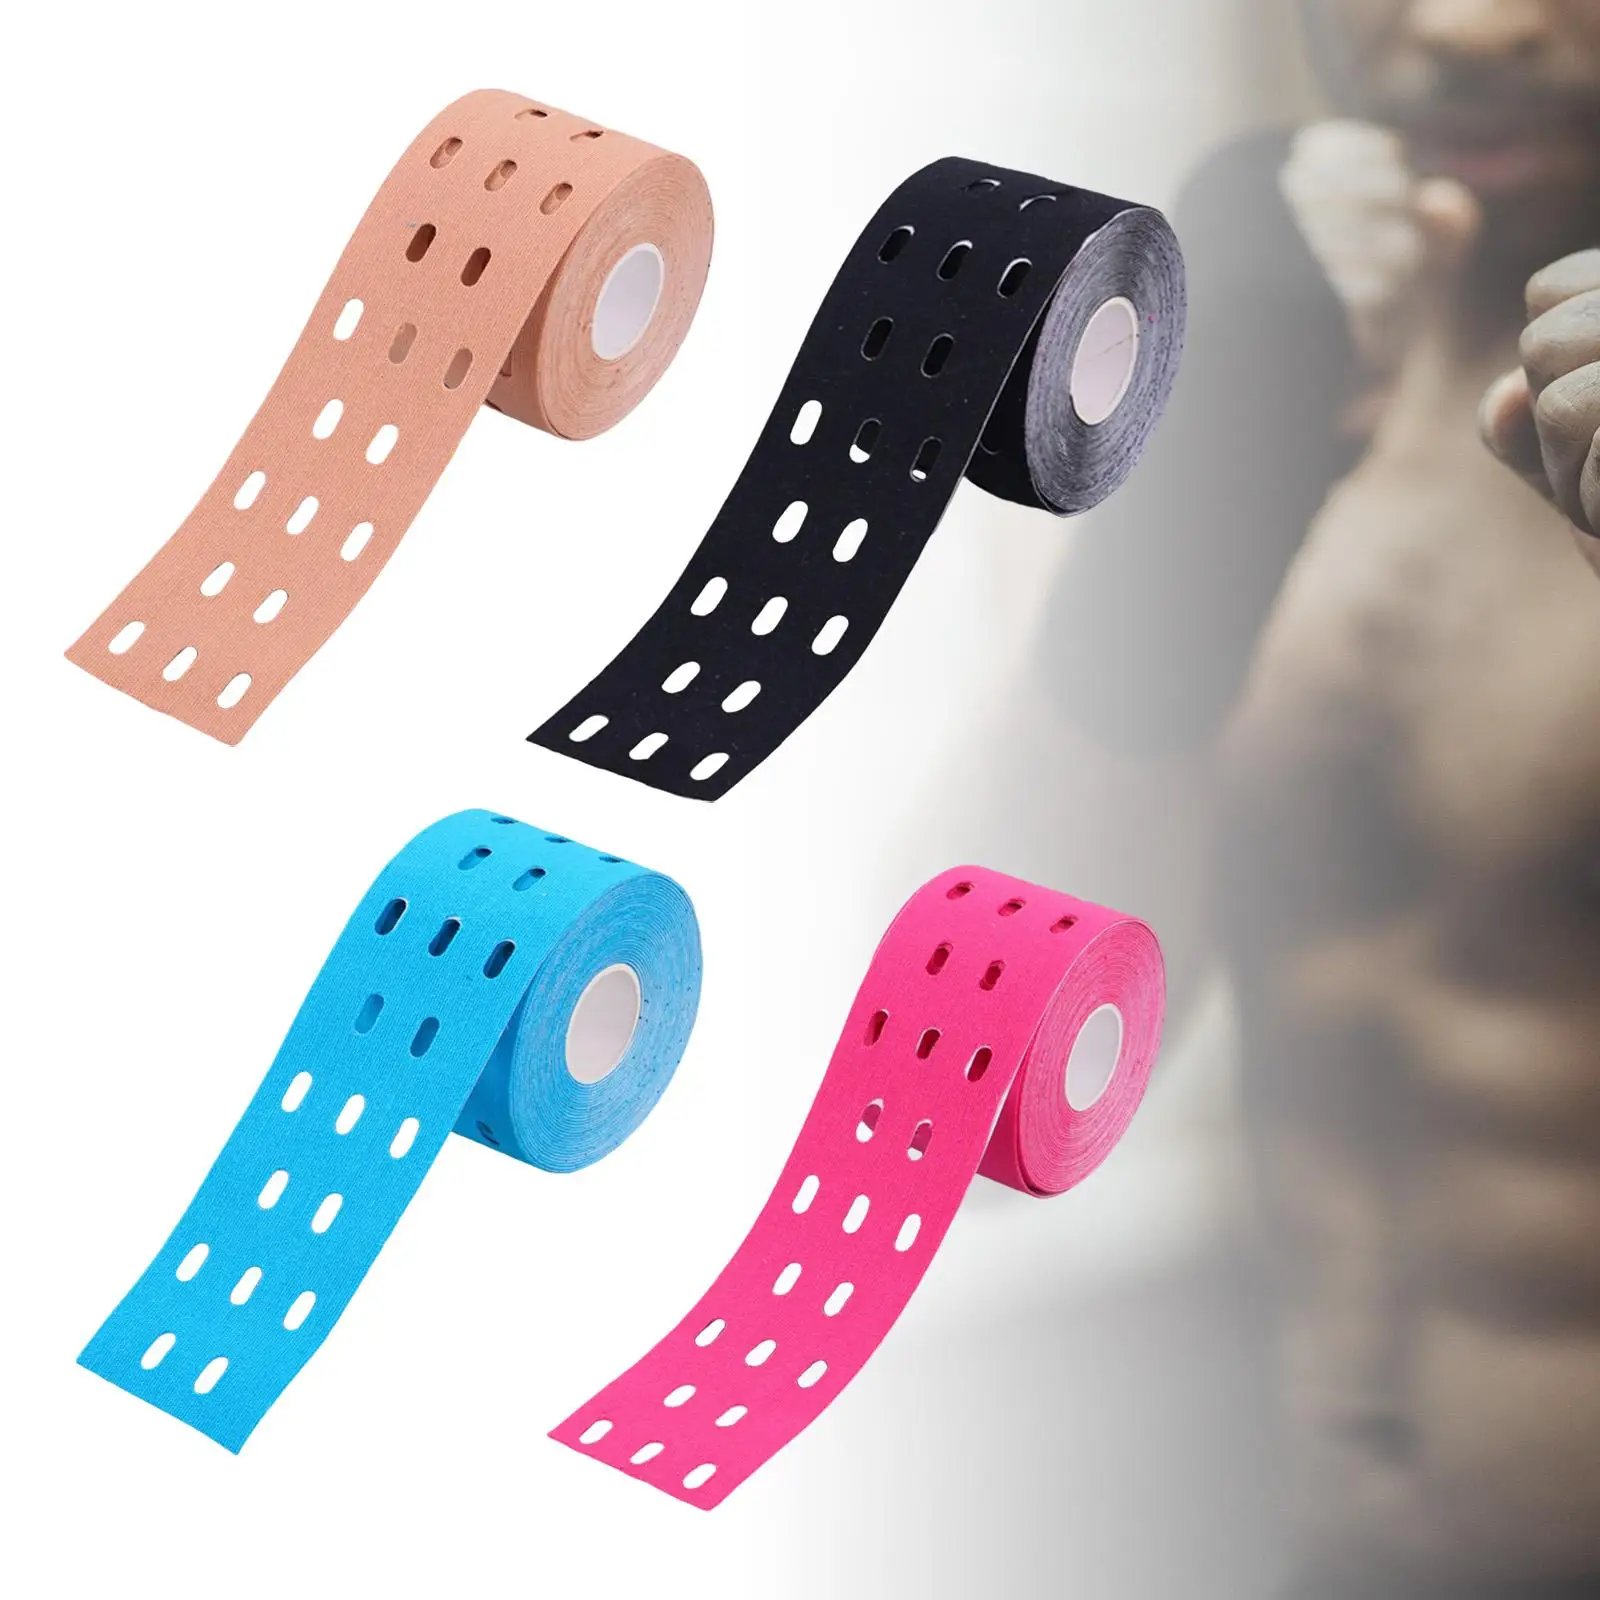 

4 Pieces 5Cmx5M Perforated Athletic Muscle Tapes Professional Waterproof for Gym Fitness Running Tennis Swimming Football